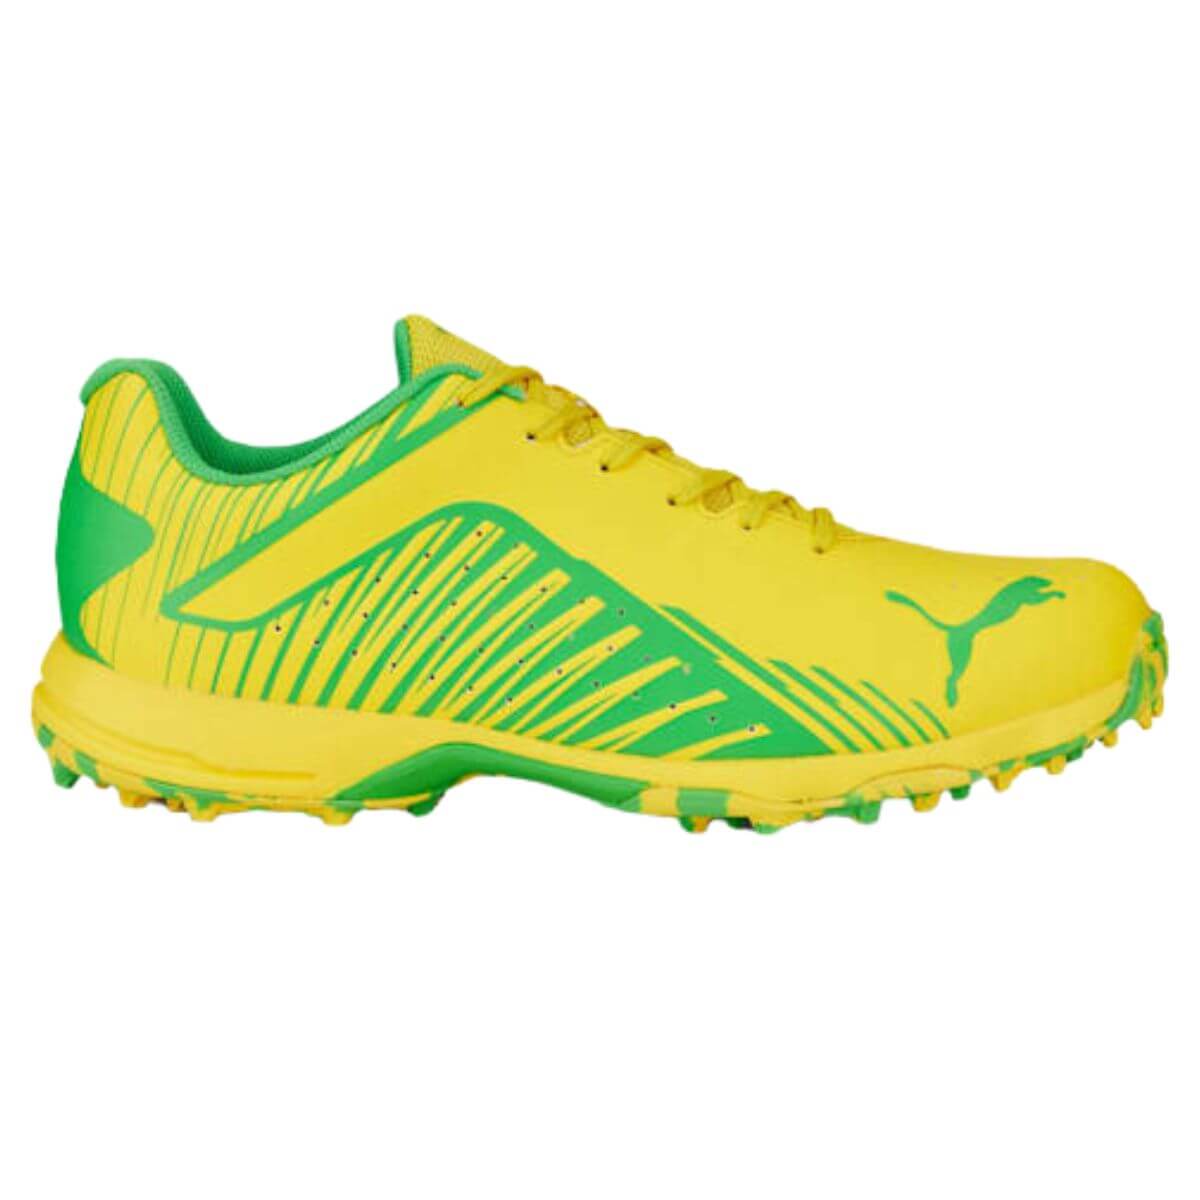 Cricket Shoes - Buy Cricket Shoes Online at Best Price | Myntra